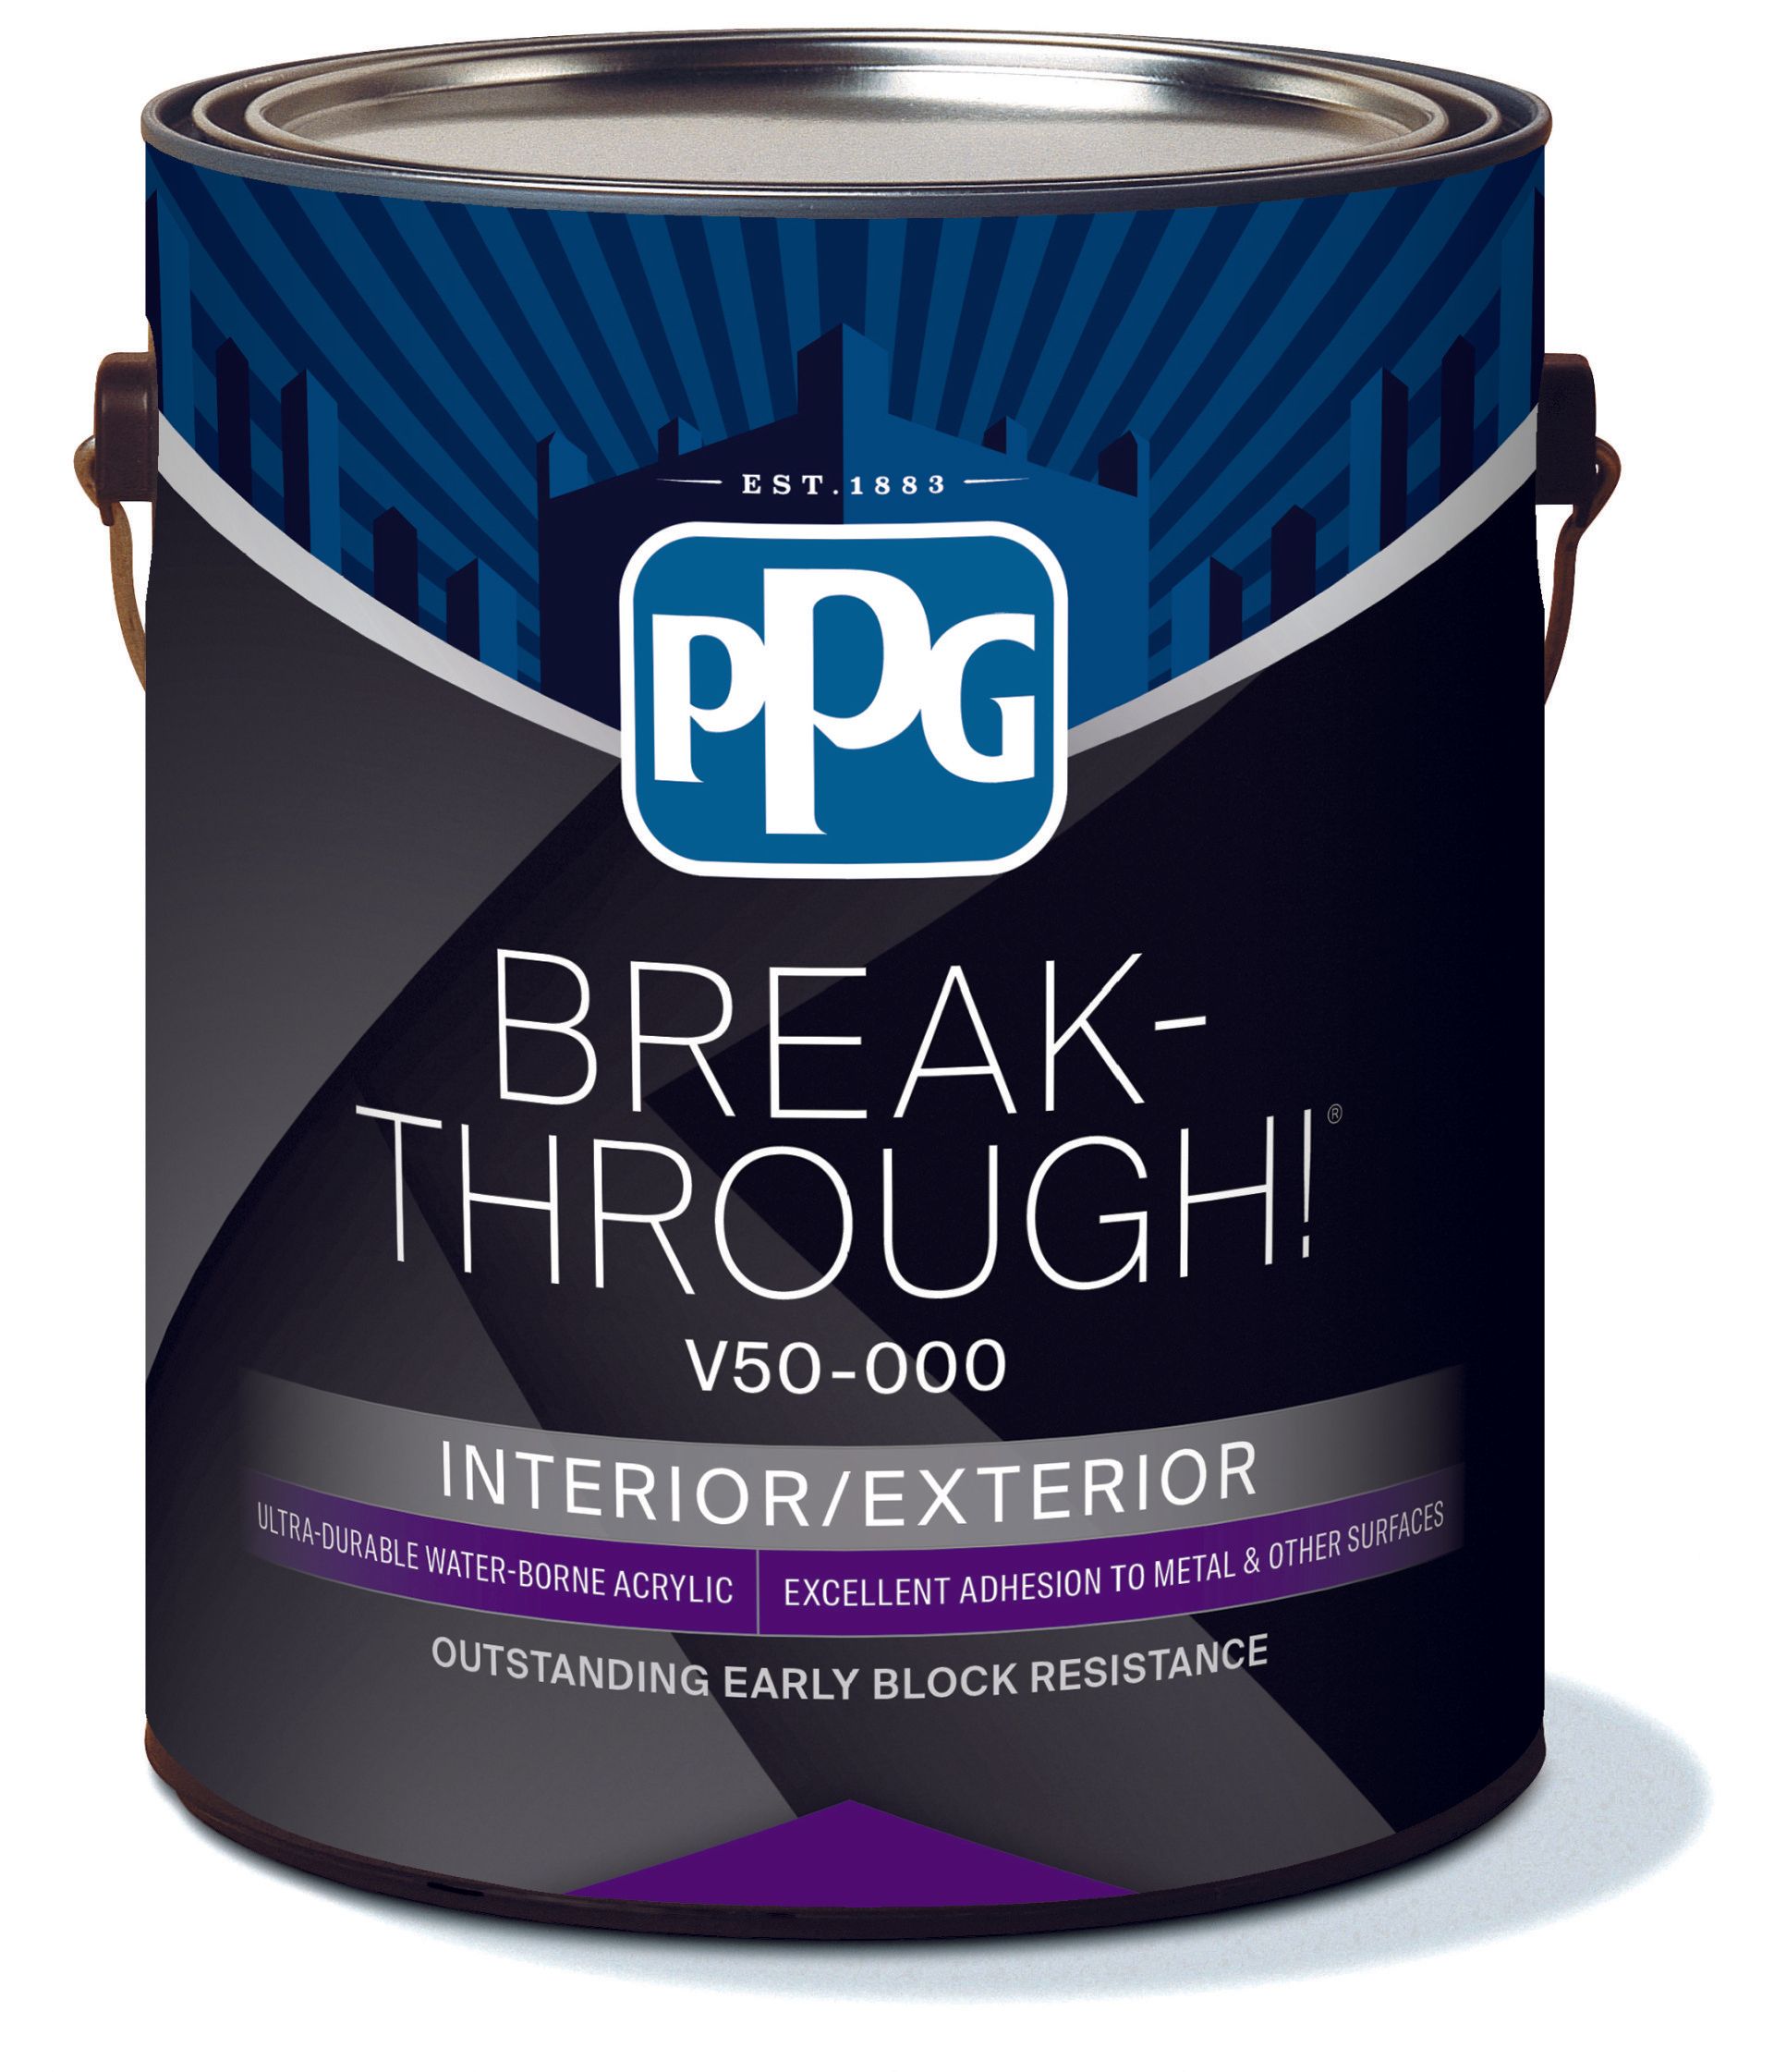 PPG BREAK-THROUGH!® Low VOC Interior/Exterior Paint from PPG at 21st Century Paints near Holland, Ohio (OH)